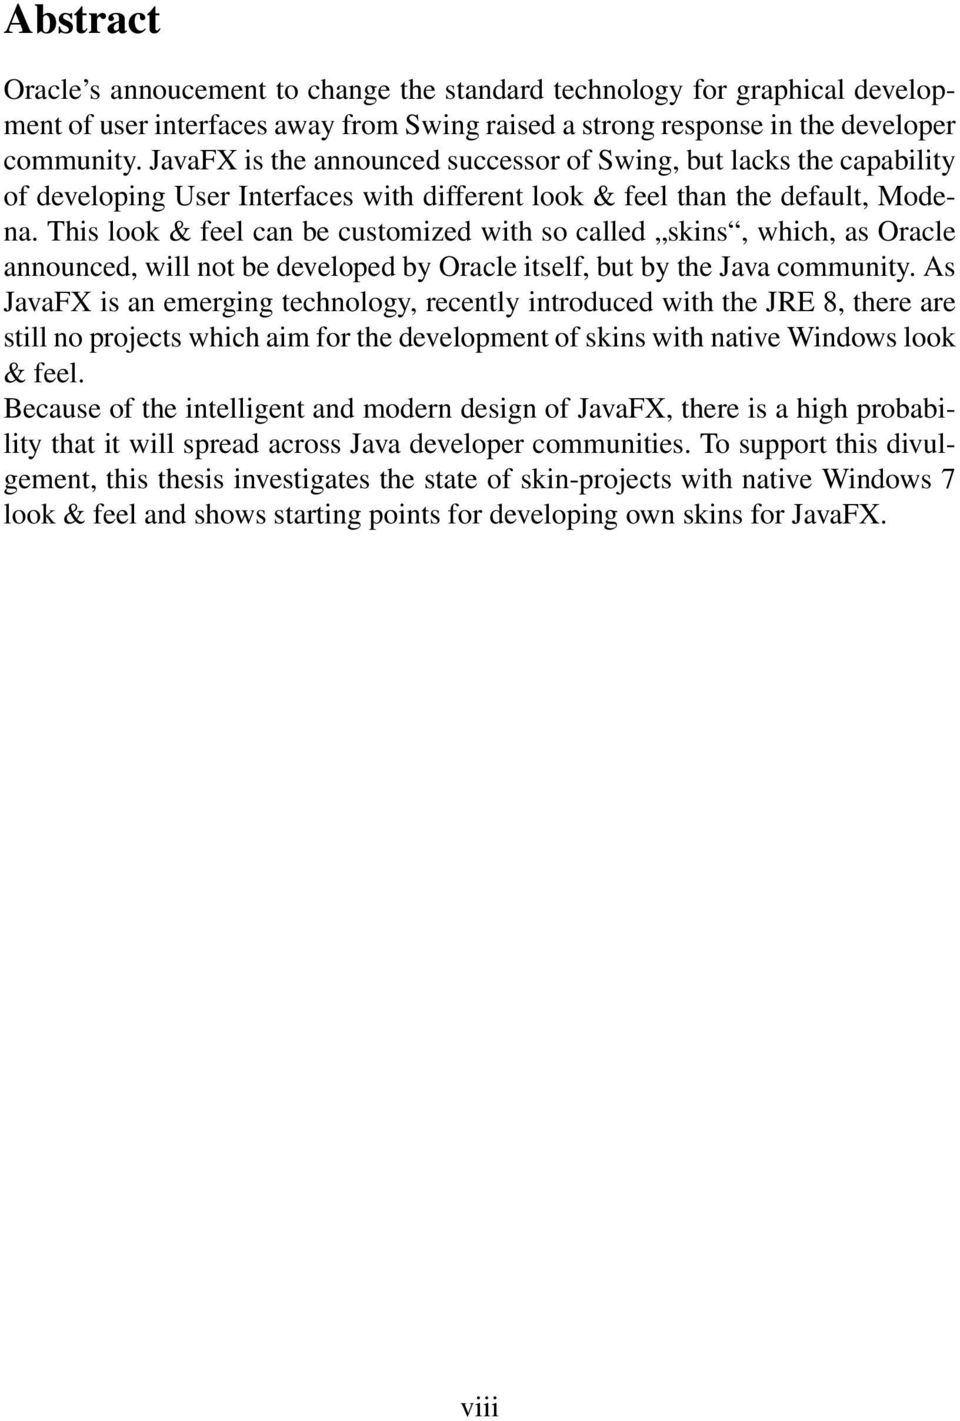 This look & feel can be customized with so called skins, which, as Oracle announced, will not be developed by Oracle itself, but by the Java community.